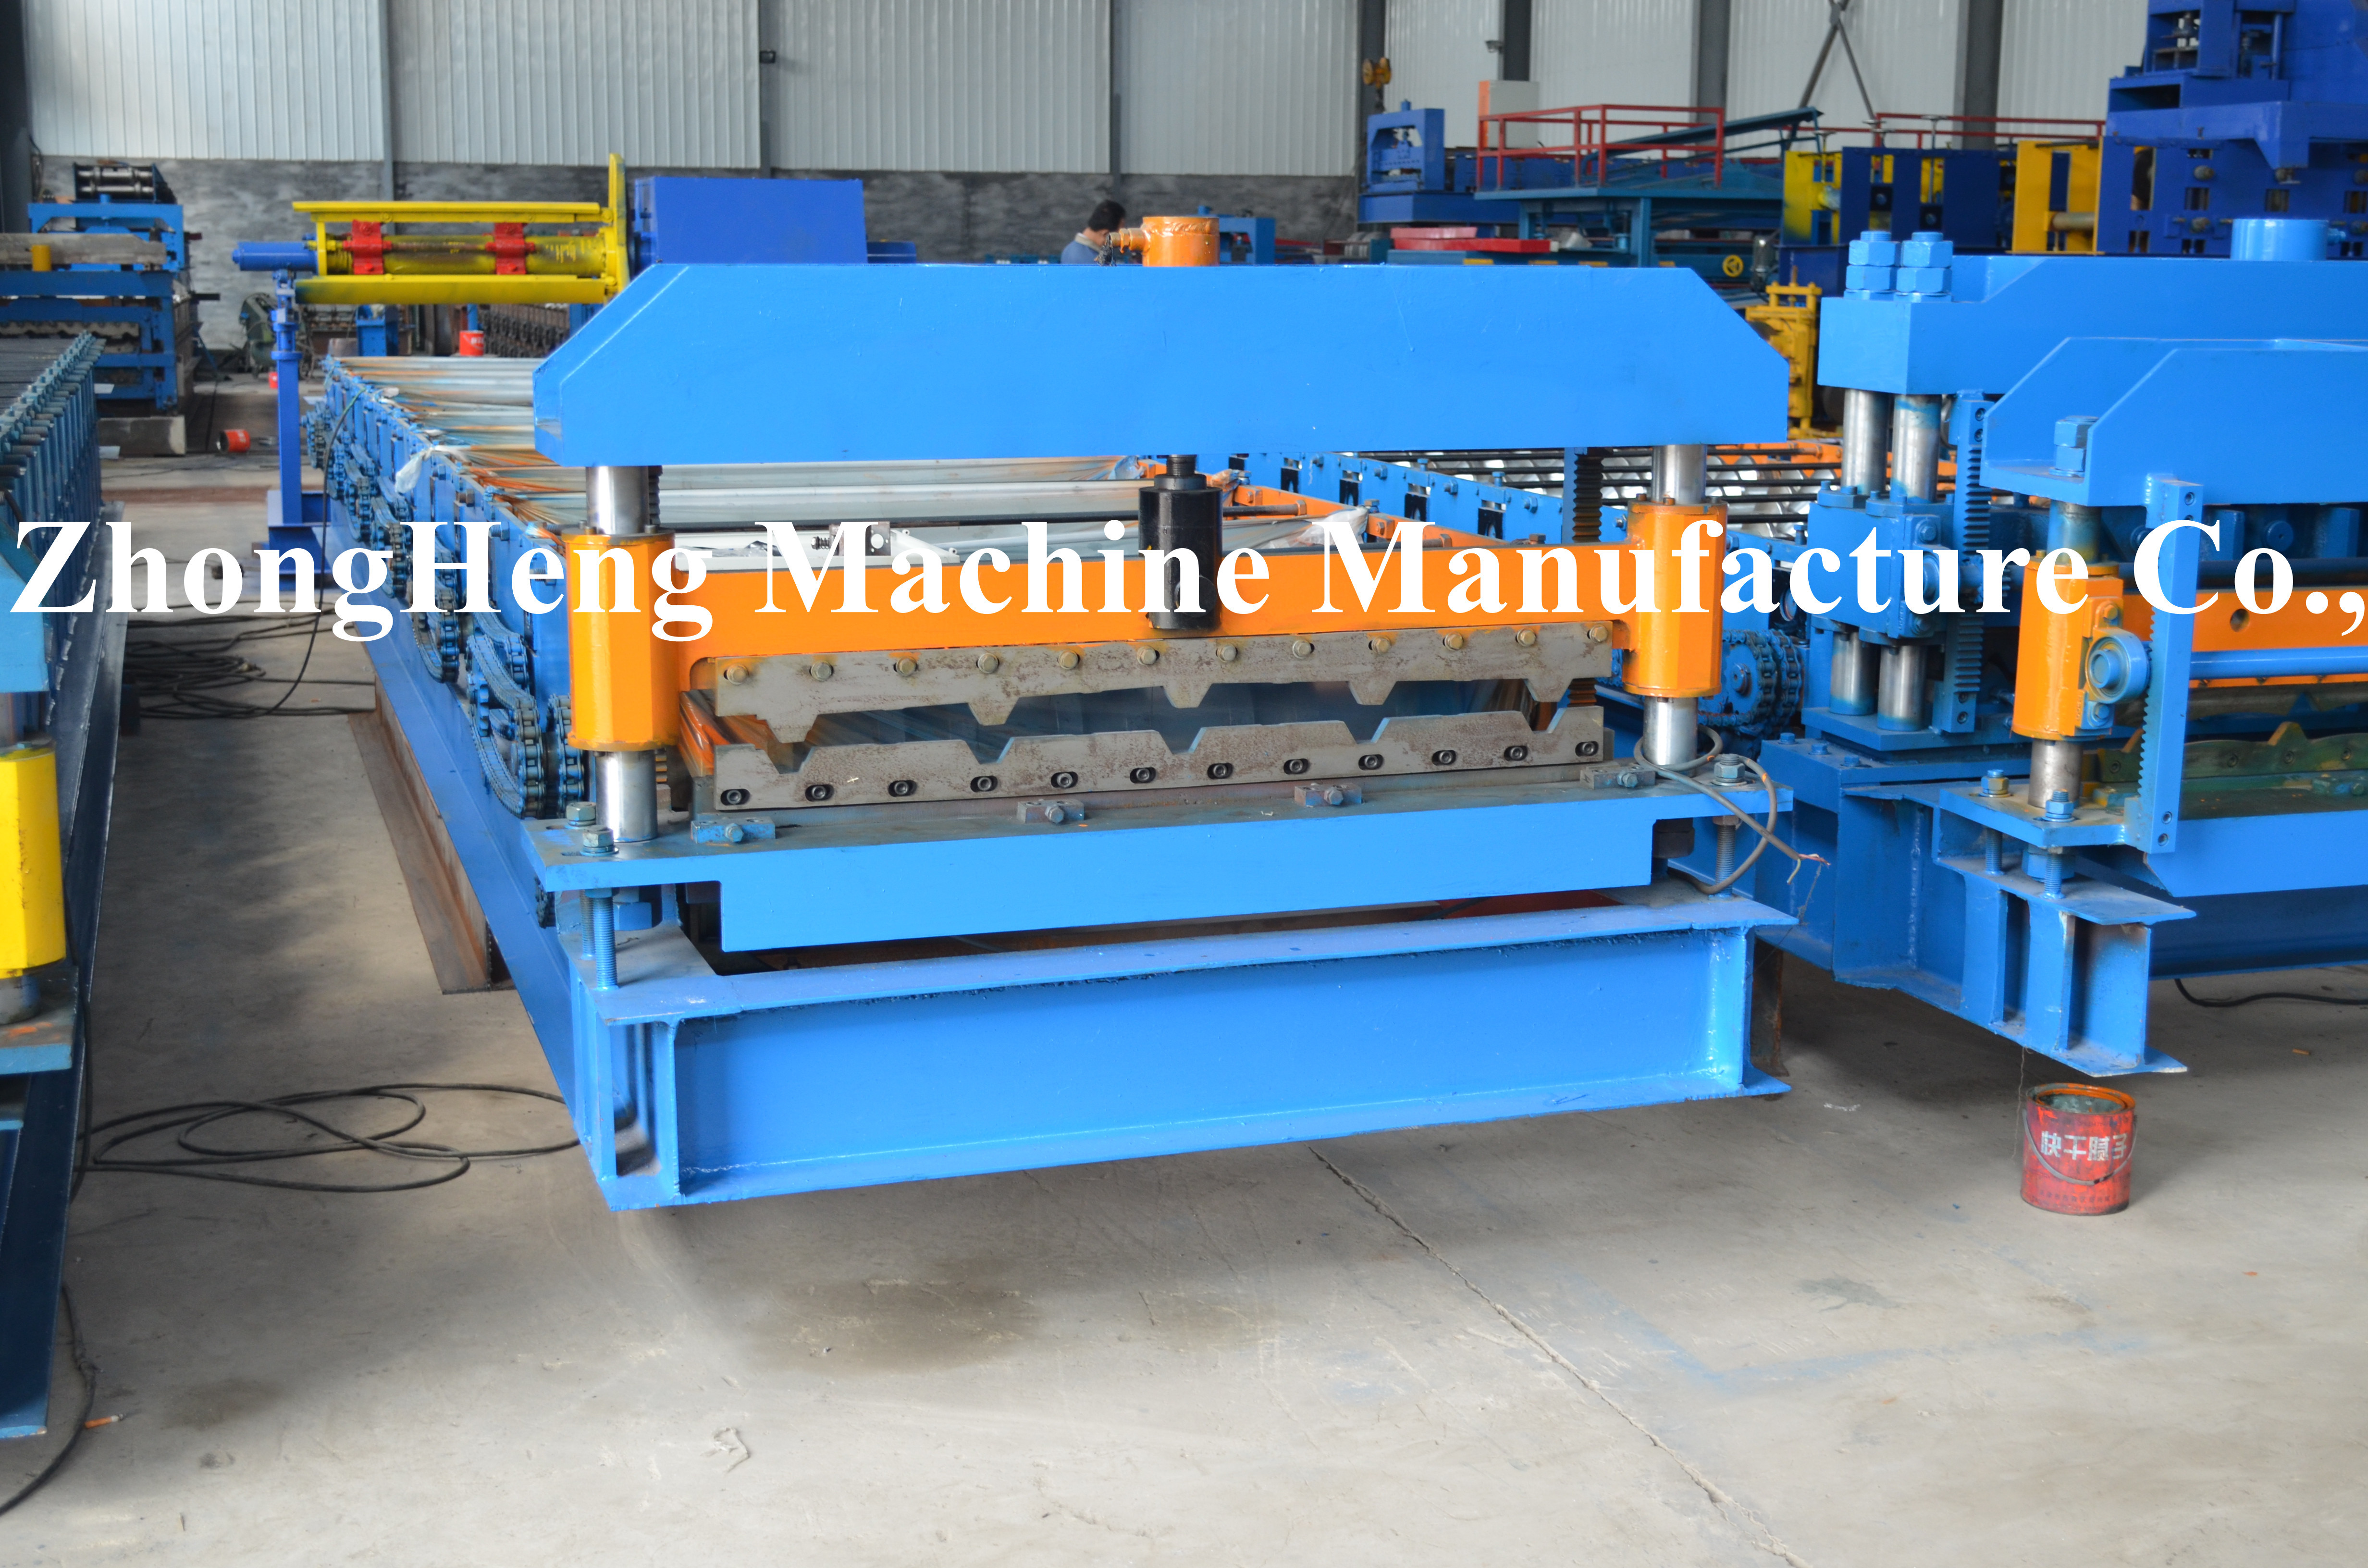 3 Phase Manual Glazed Tile Roll Forming Machine With Pillar Leading Pressing